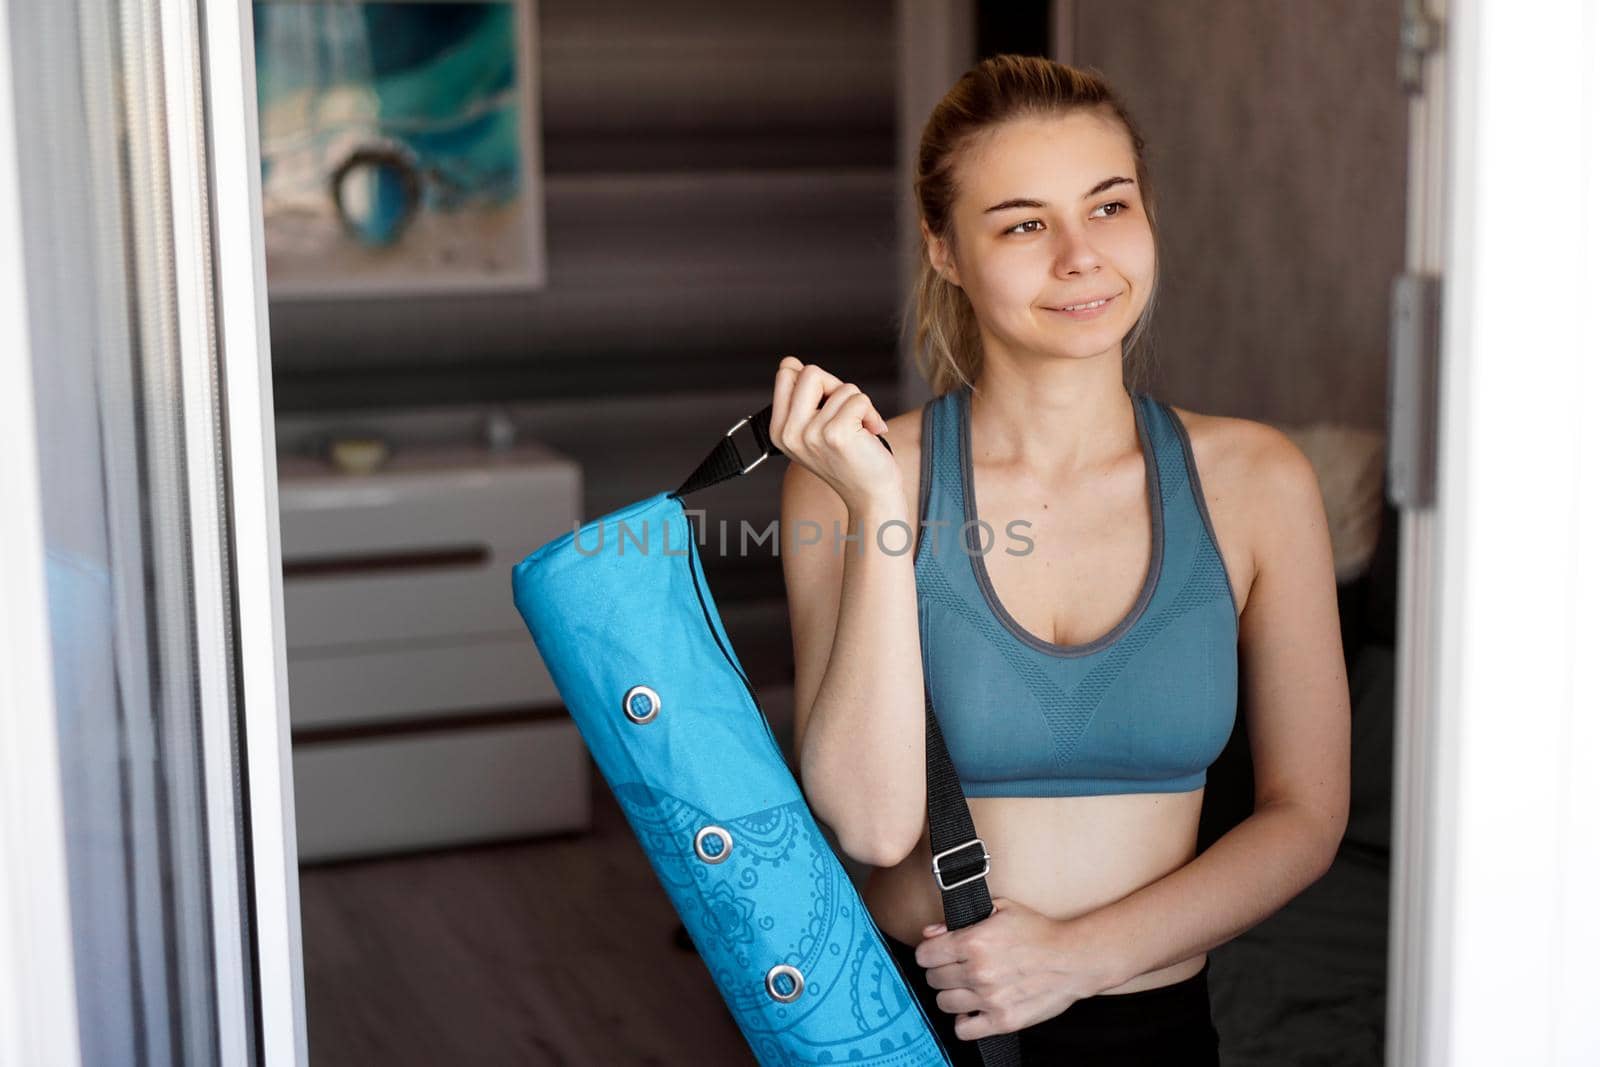 Portrait of an athletic young woman. She is going to workout, yoga mat case in hand